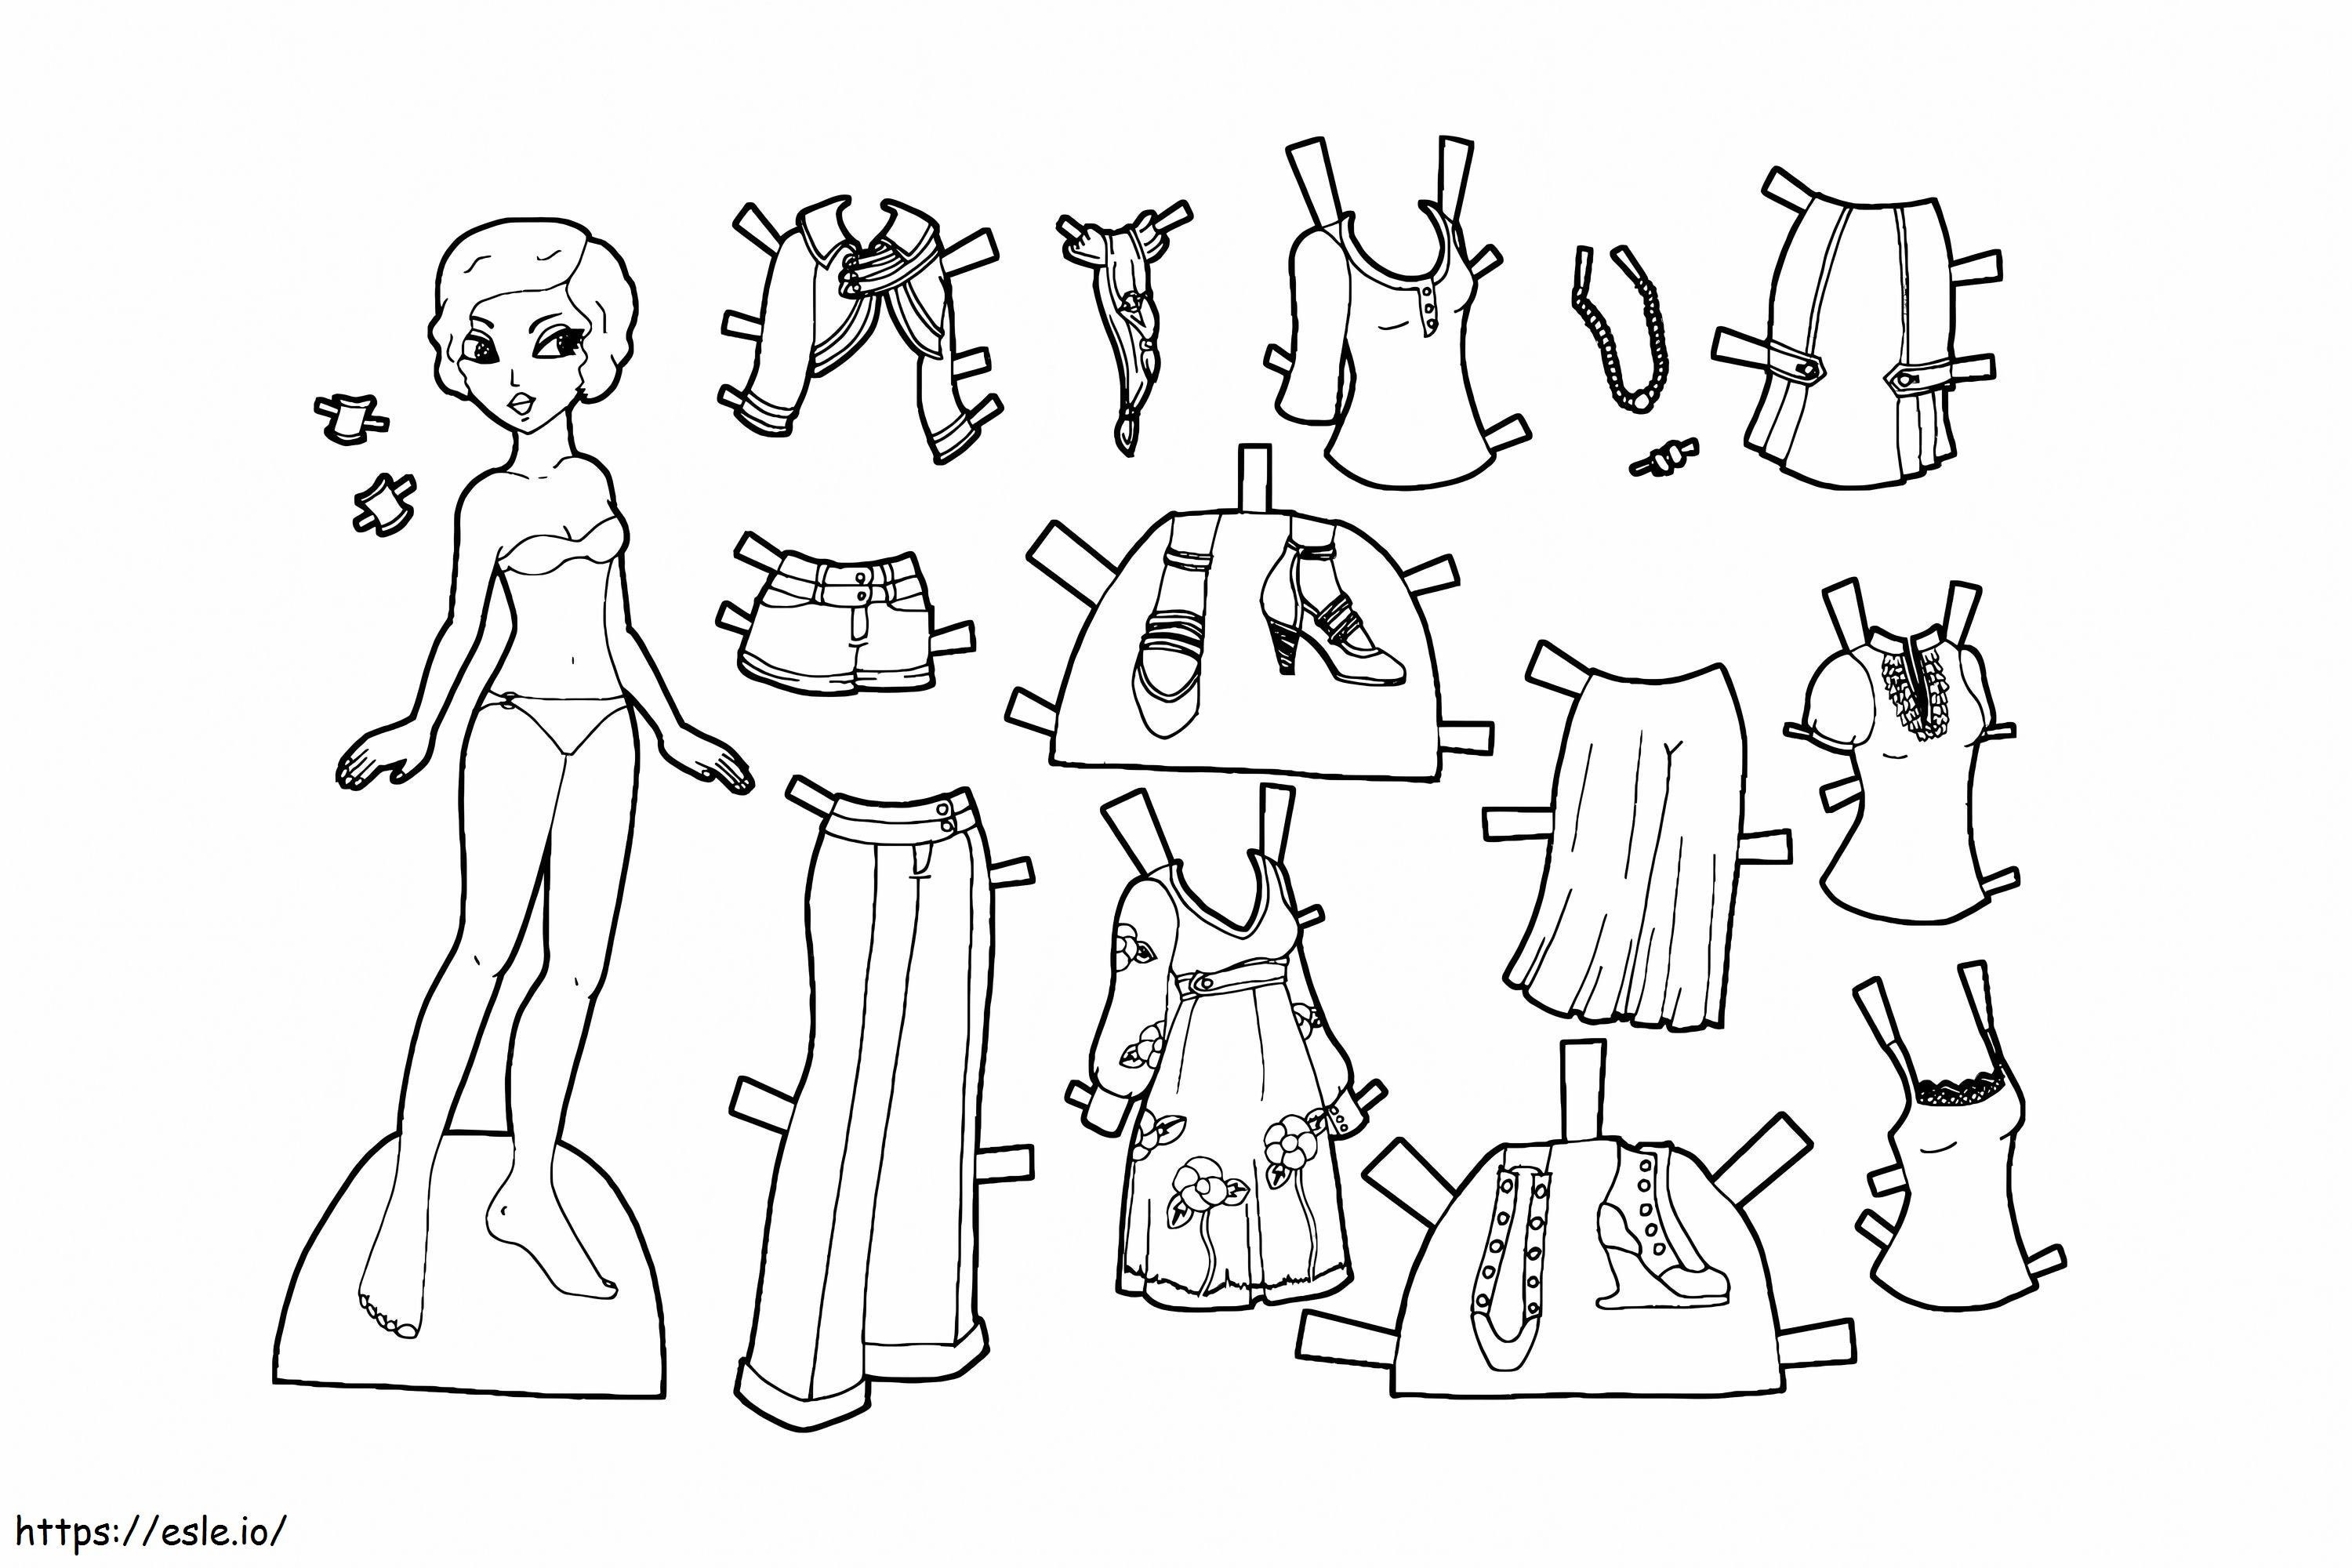 Paper Dolls 13 coloring page